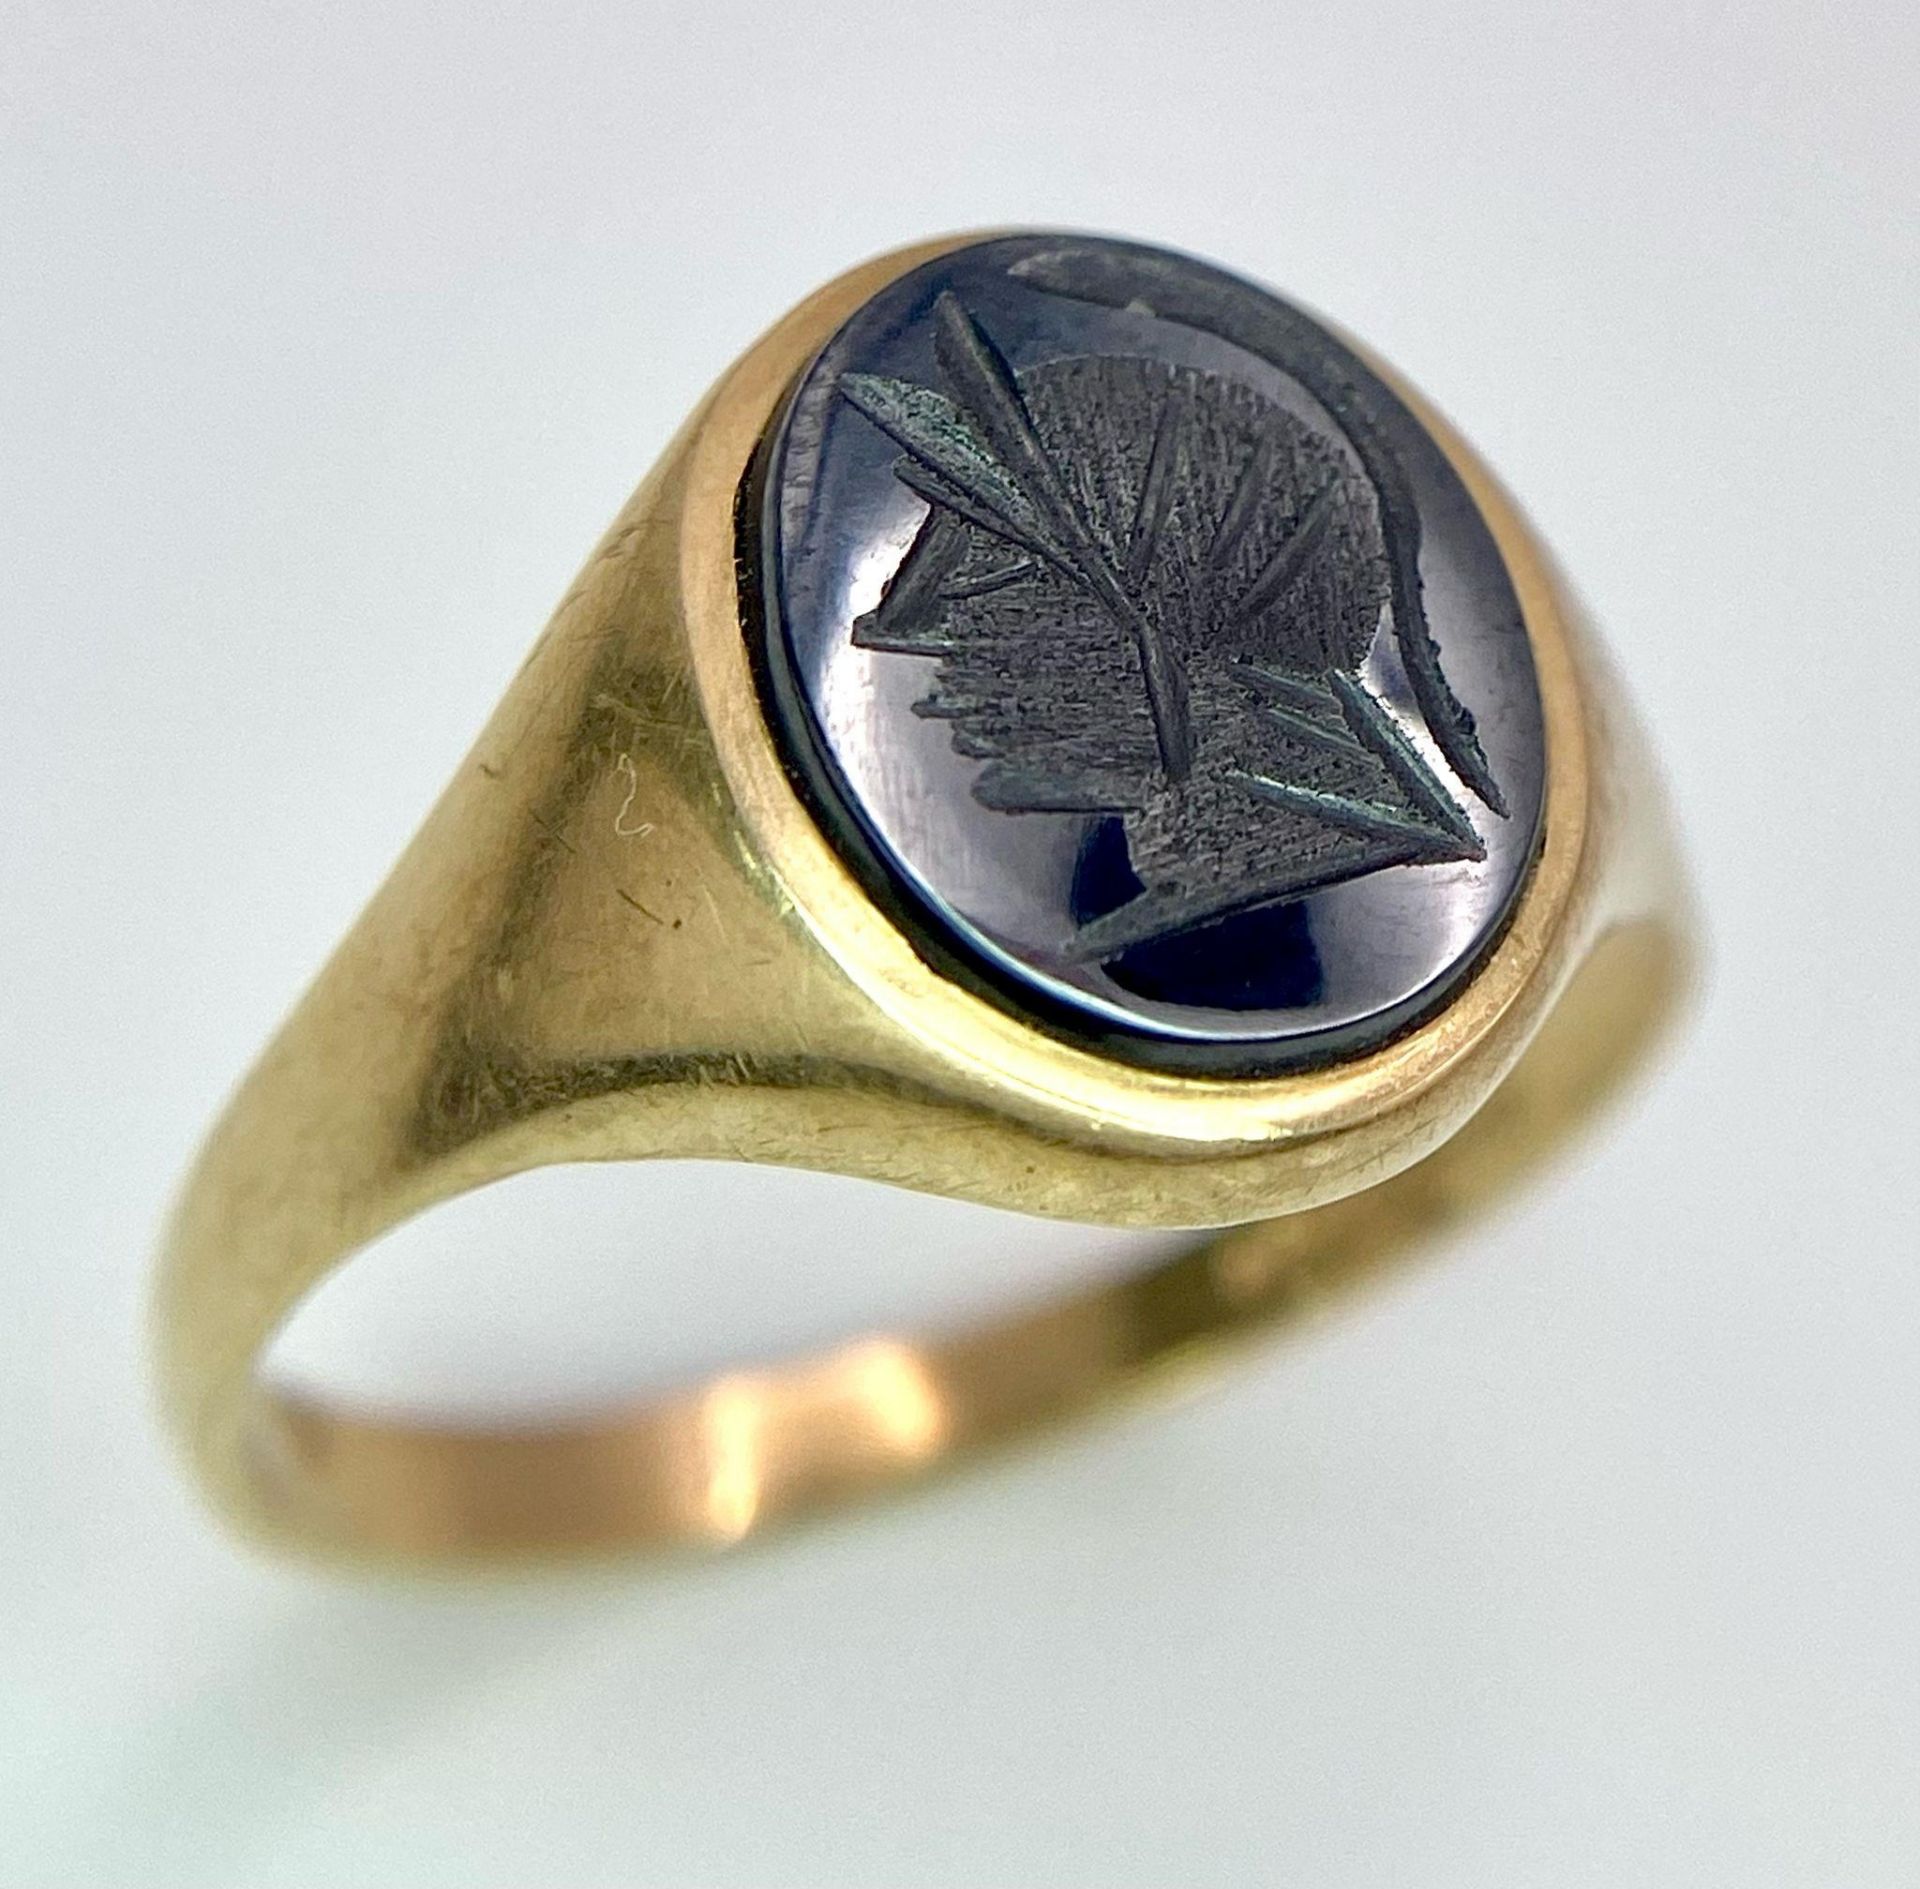 A Vintage 9K Yellow Gold Onyx Signet Ring. Carved centurion decoration. Size T. 3g total weight.